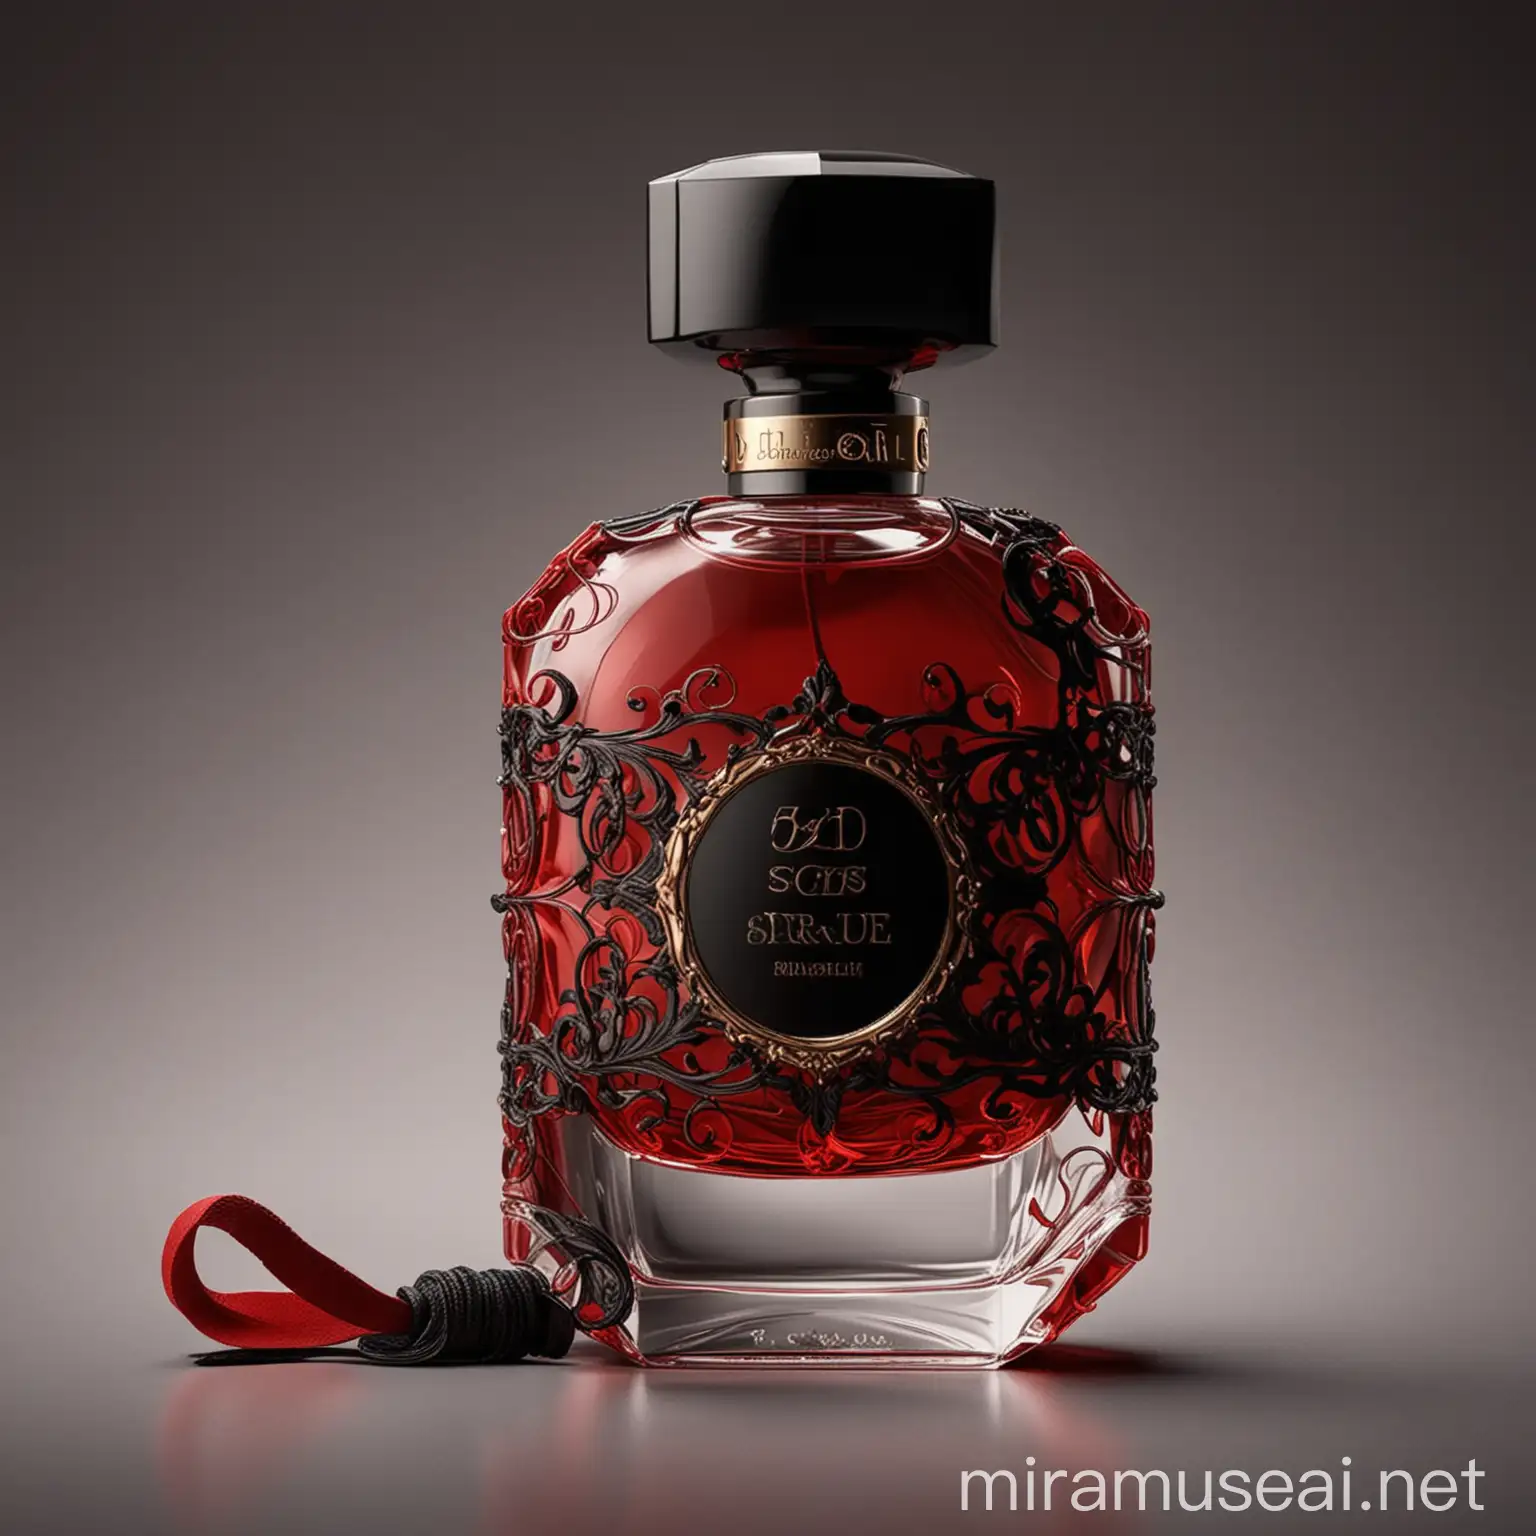 can you create parfume bottle that a women will use  who is a rich bussiness women
in her 30s  for my design , ı used red and black in my design, it has a modern and luxury concept

